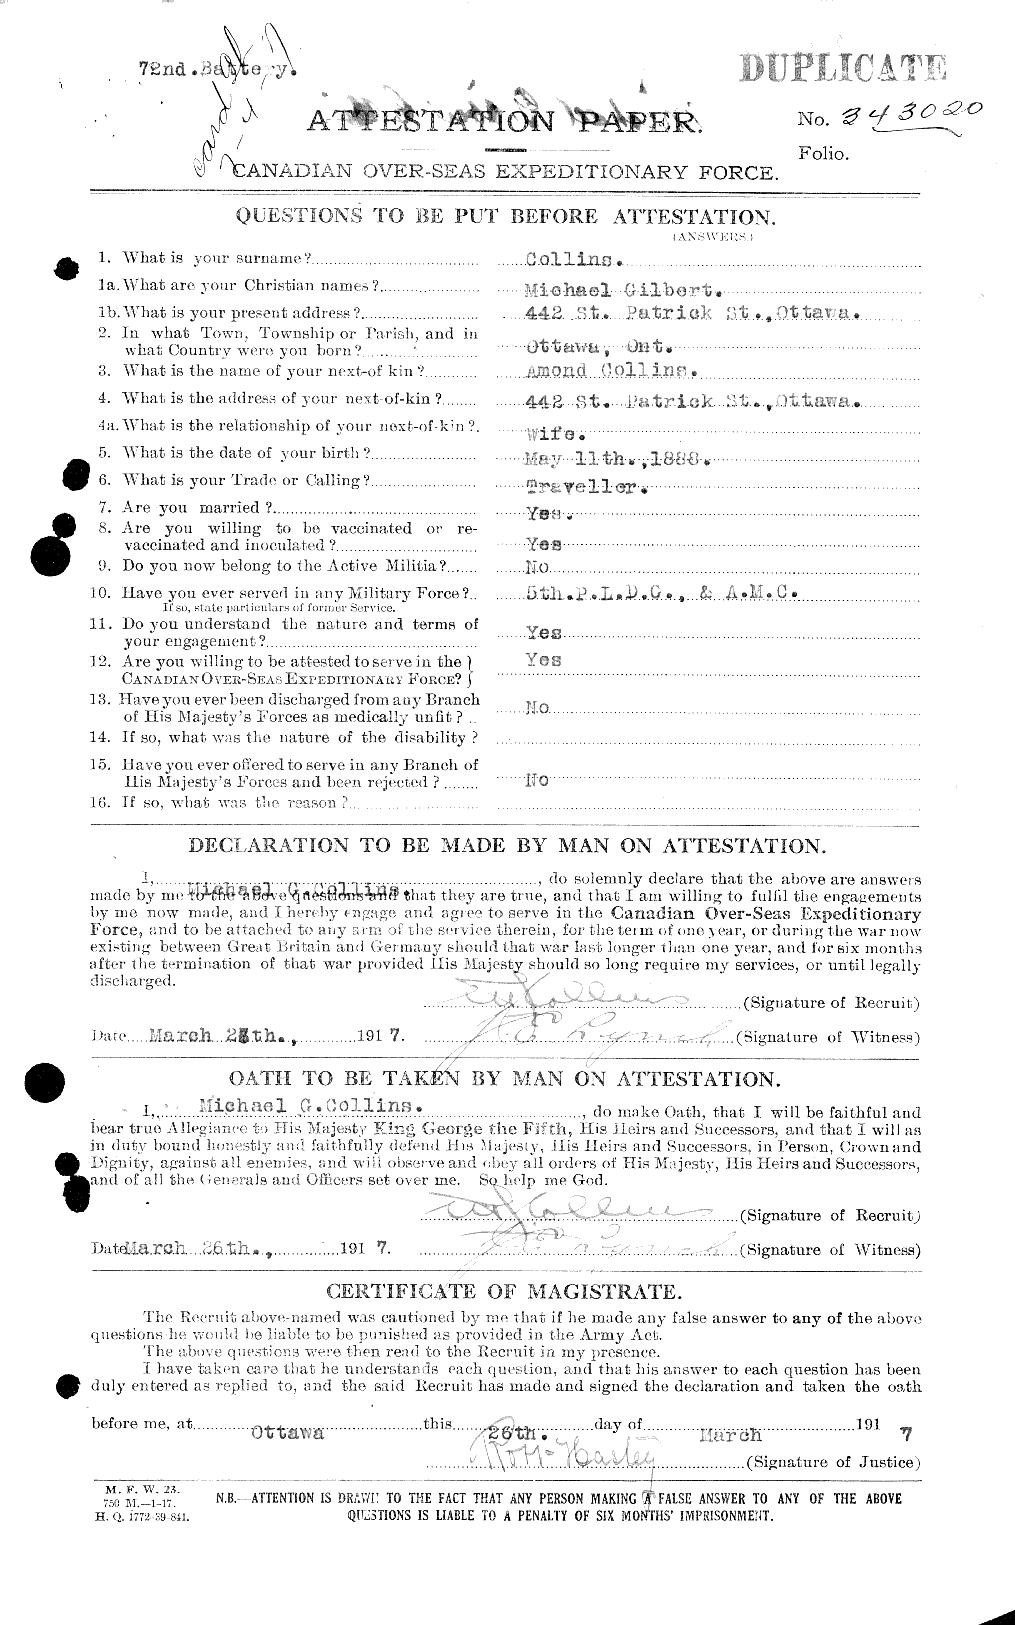 Personnel Records of the First World War - CEF 034470a